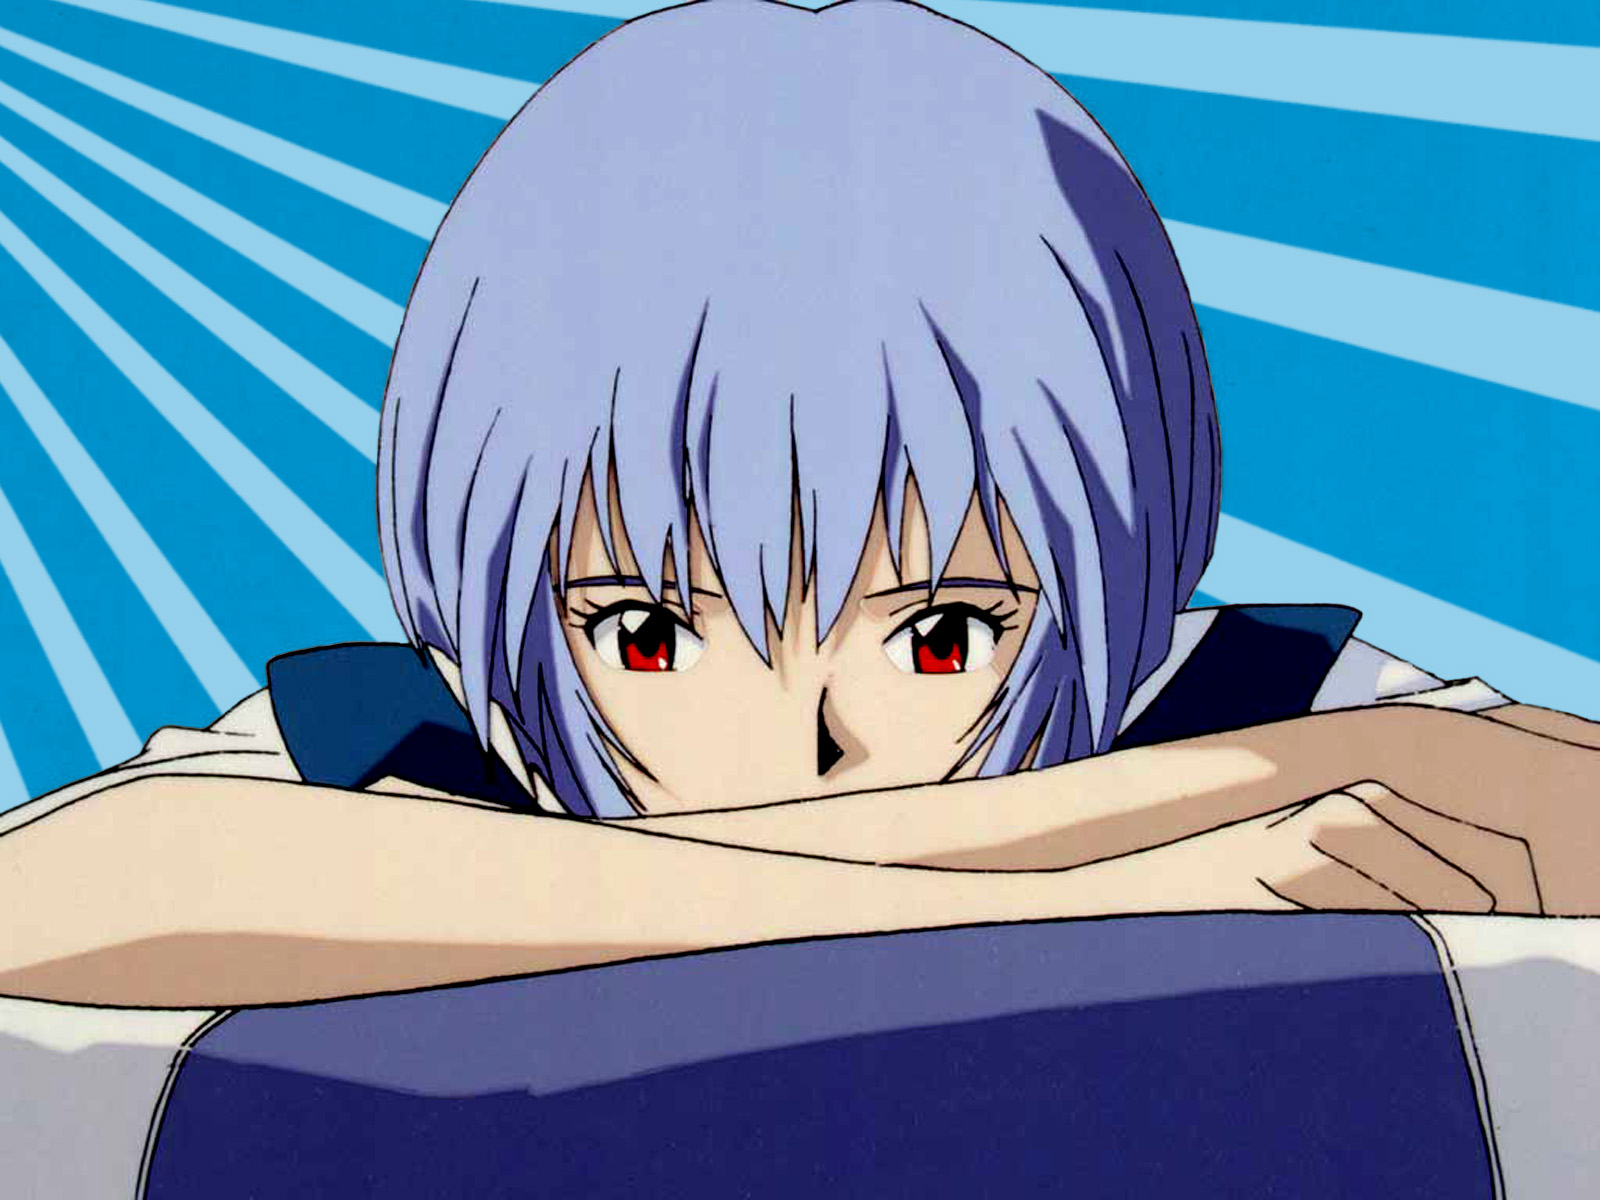 Rei Ayanami Evangelion HD Anime Wallpaper Download Free Wallpapers in ...